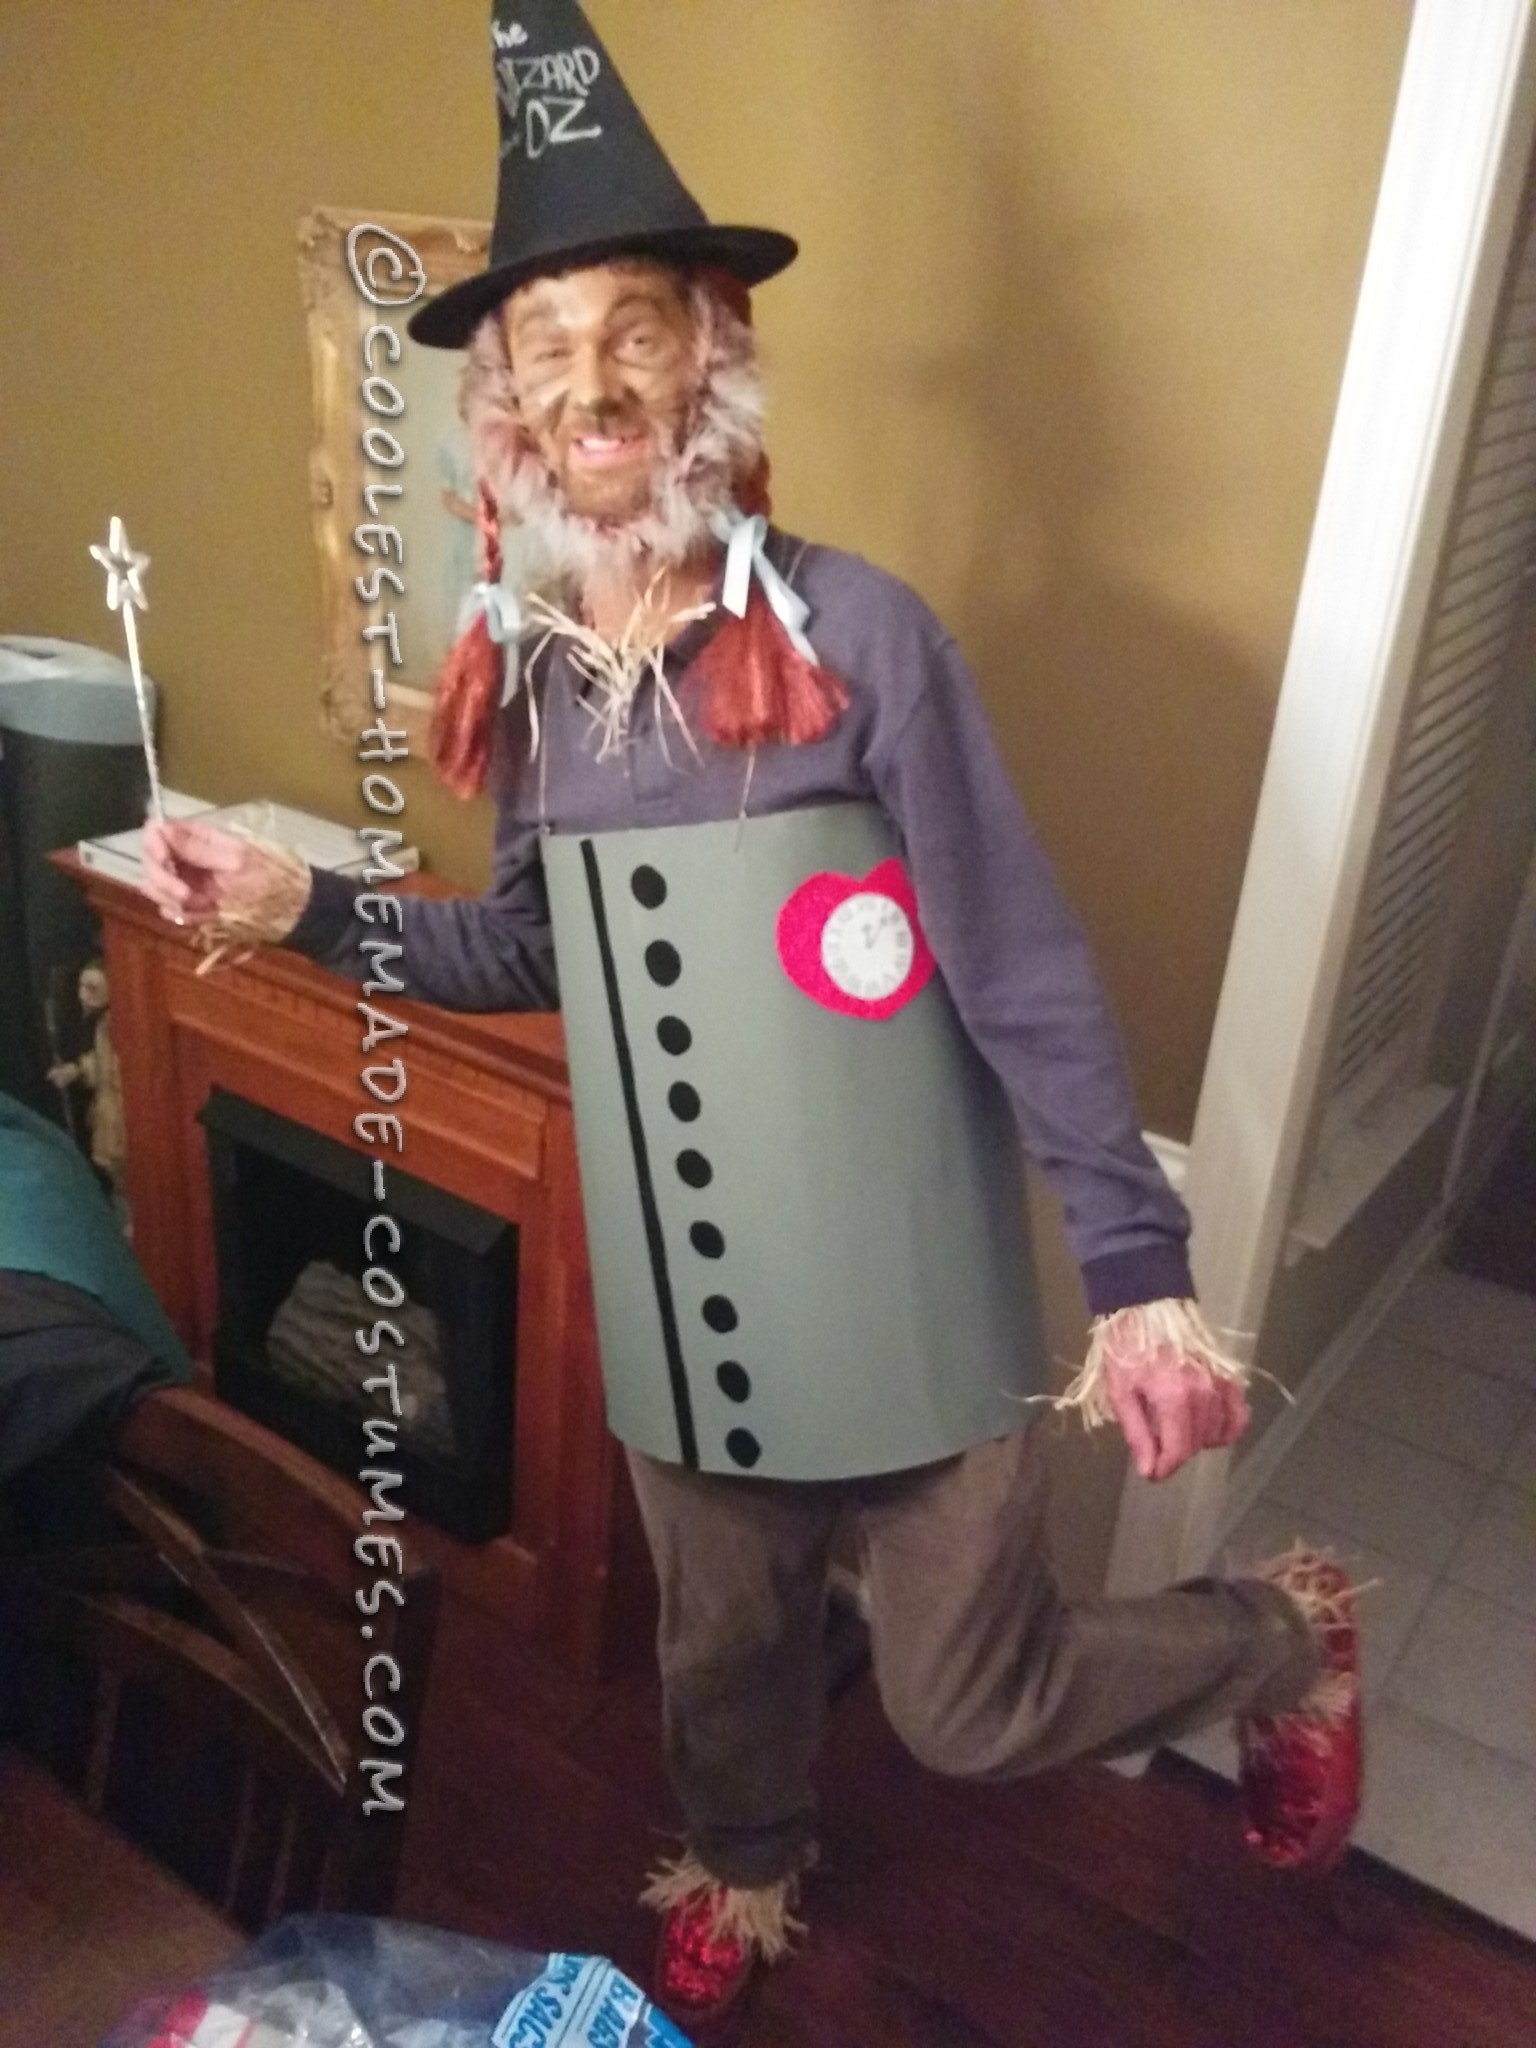 Homemade All-In-One Wizard of Oz Costume